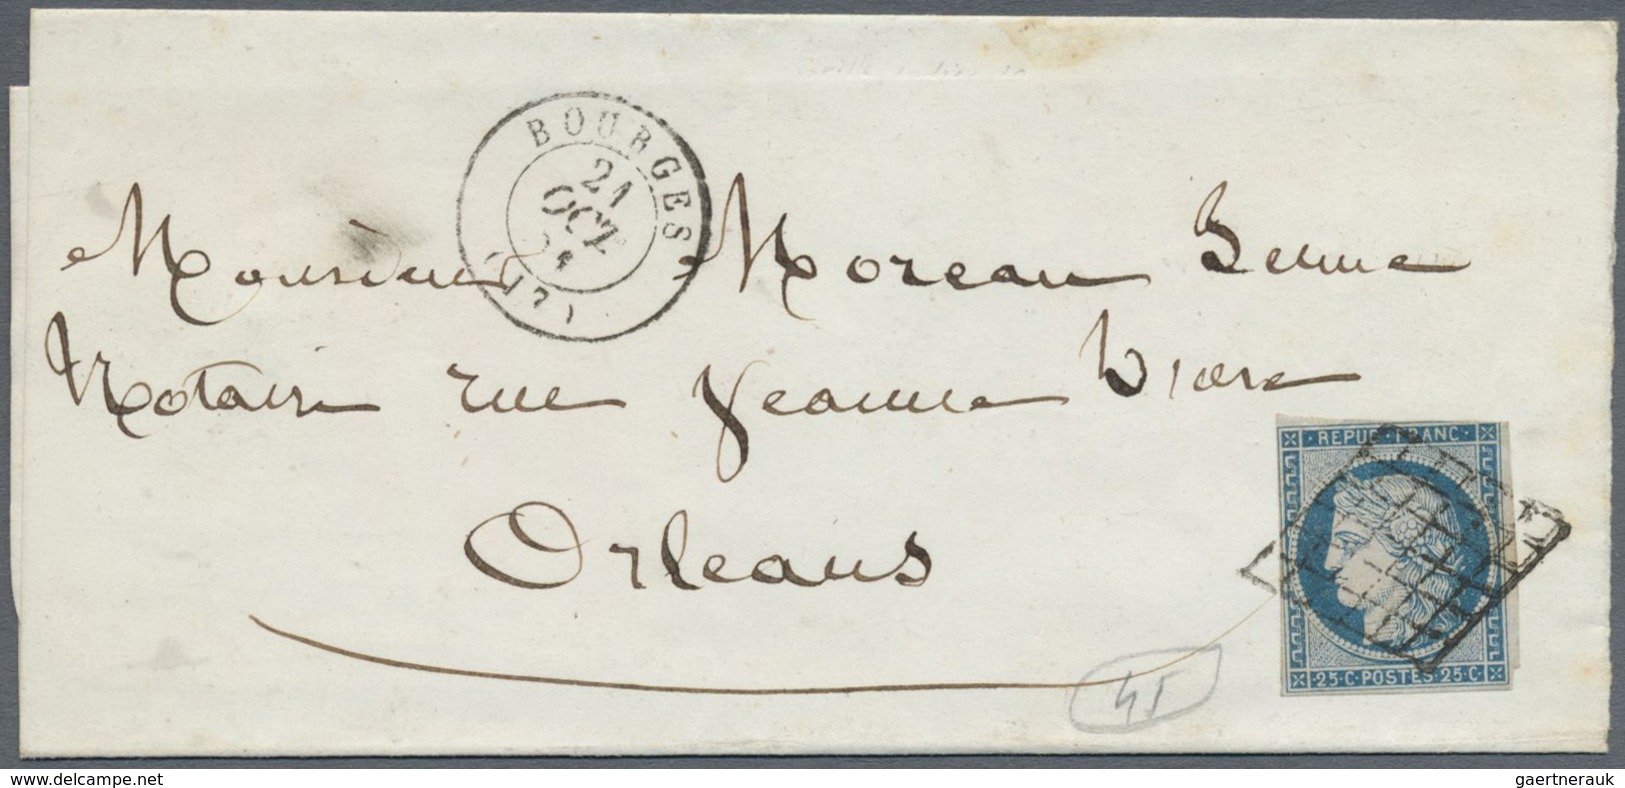 Br Frankreich: 1850/1875, CERES and NAPOLEON (various issues), holding of apprx. 540 entires, varied co